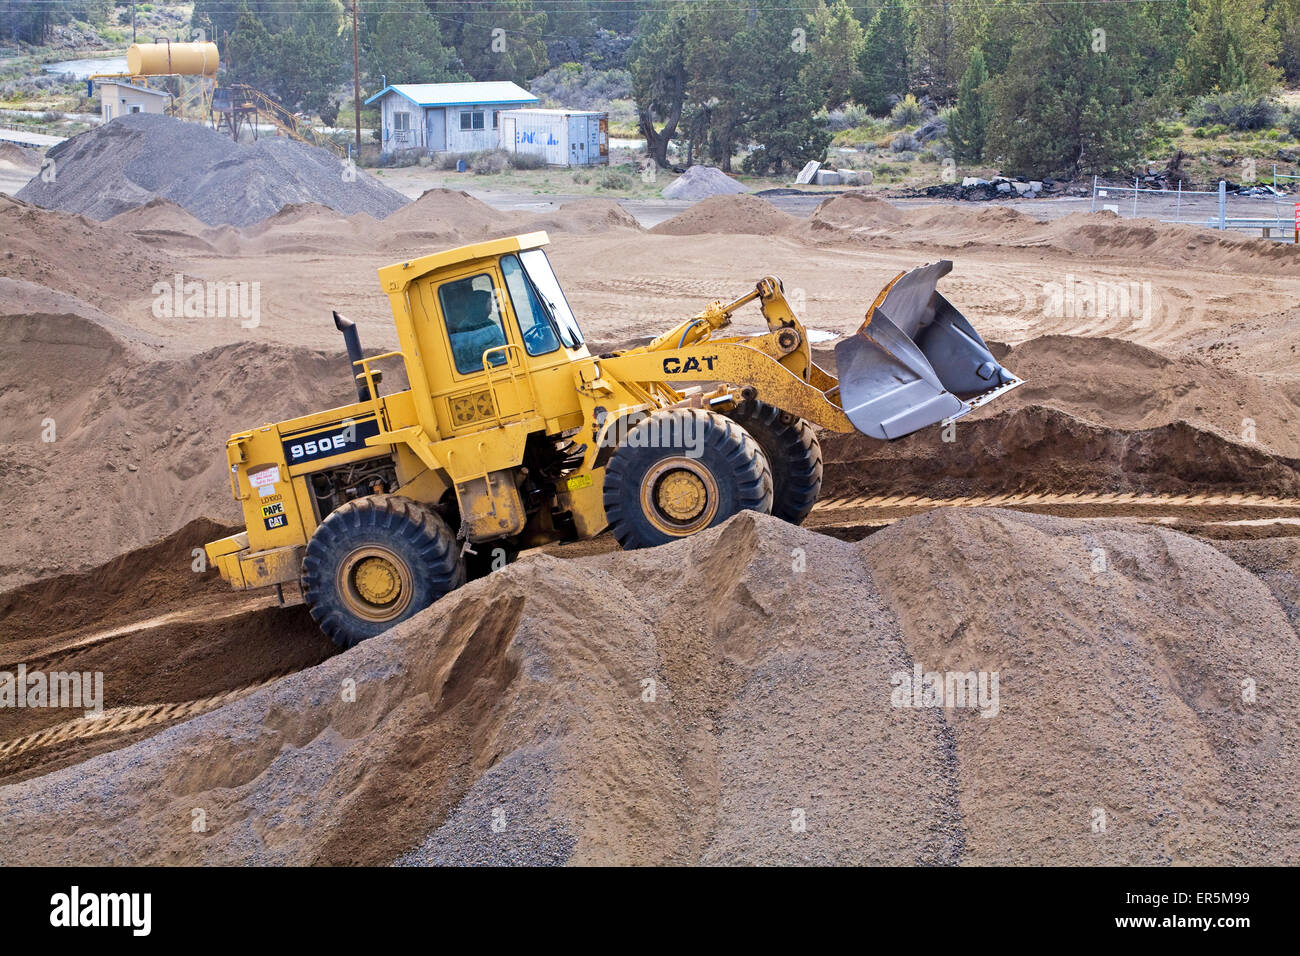 A caterpillar 'cat' 950E earth mover plows into a pile of dirt at a construction site in central oregon Stock Photo